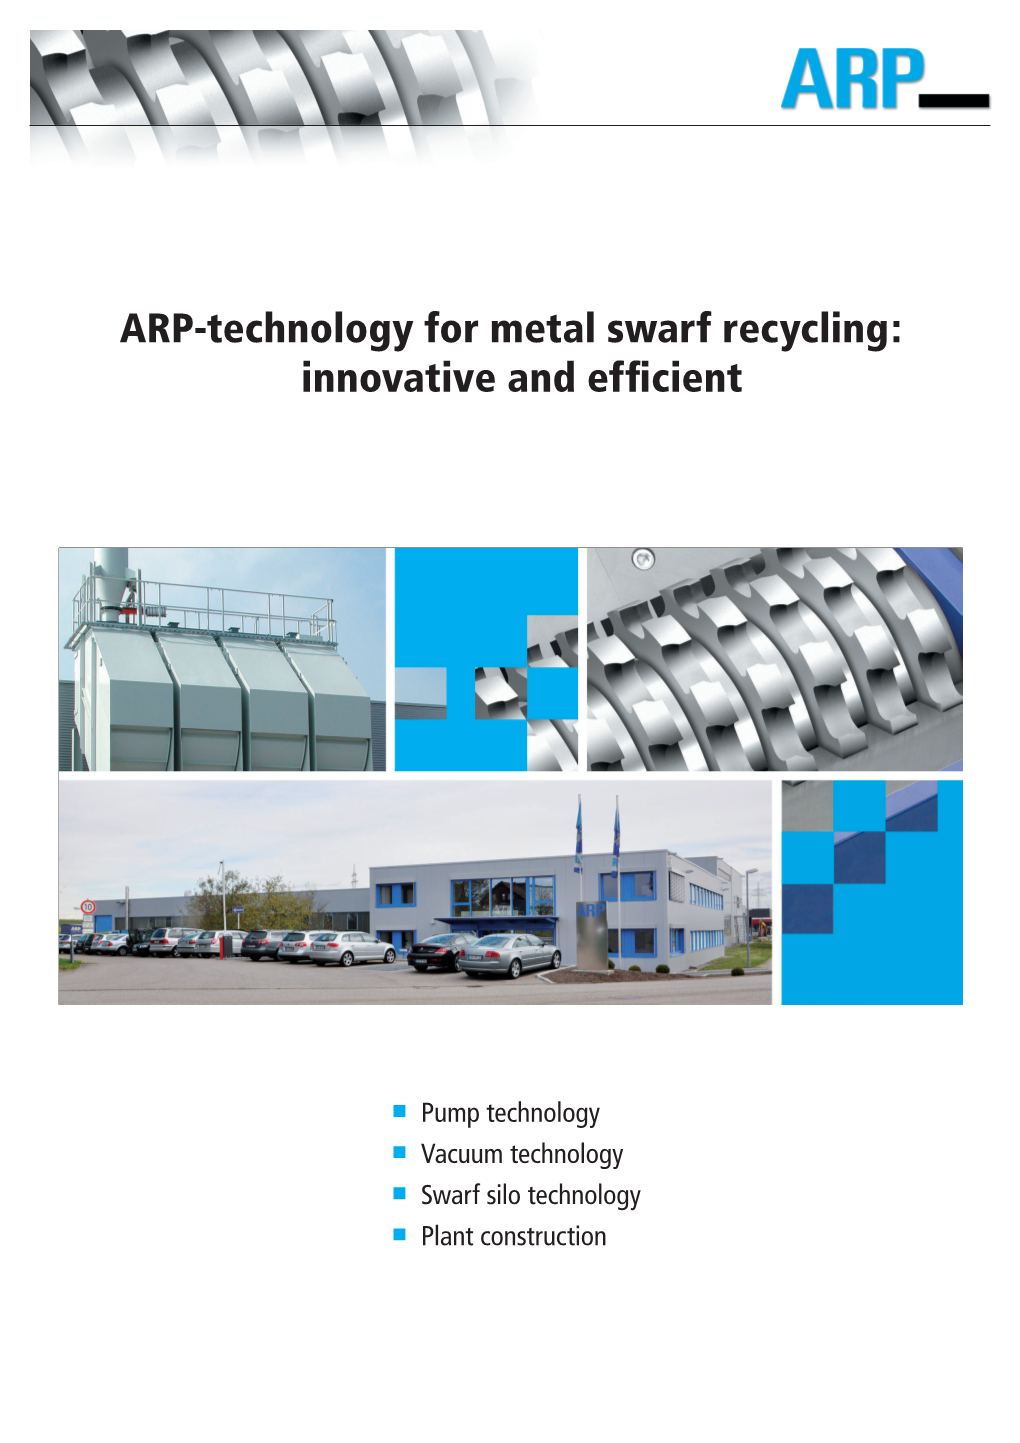 ARP-Technology for Metal Swarf Recycling: Innovative and Efficient